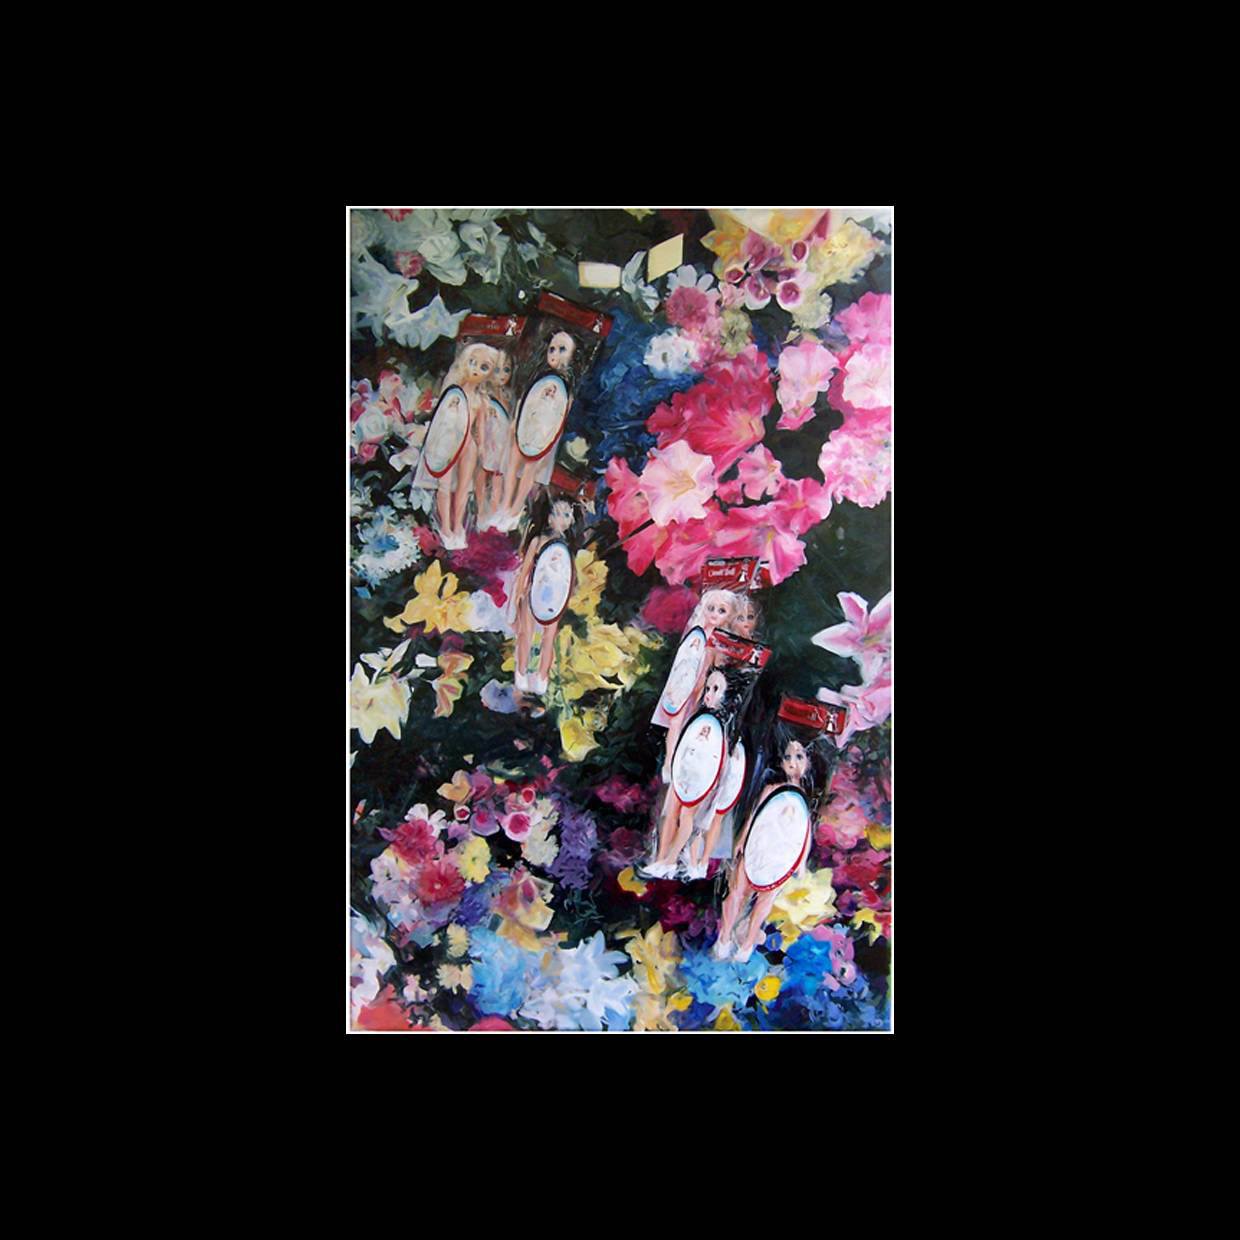 A painting of dolls and flowers